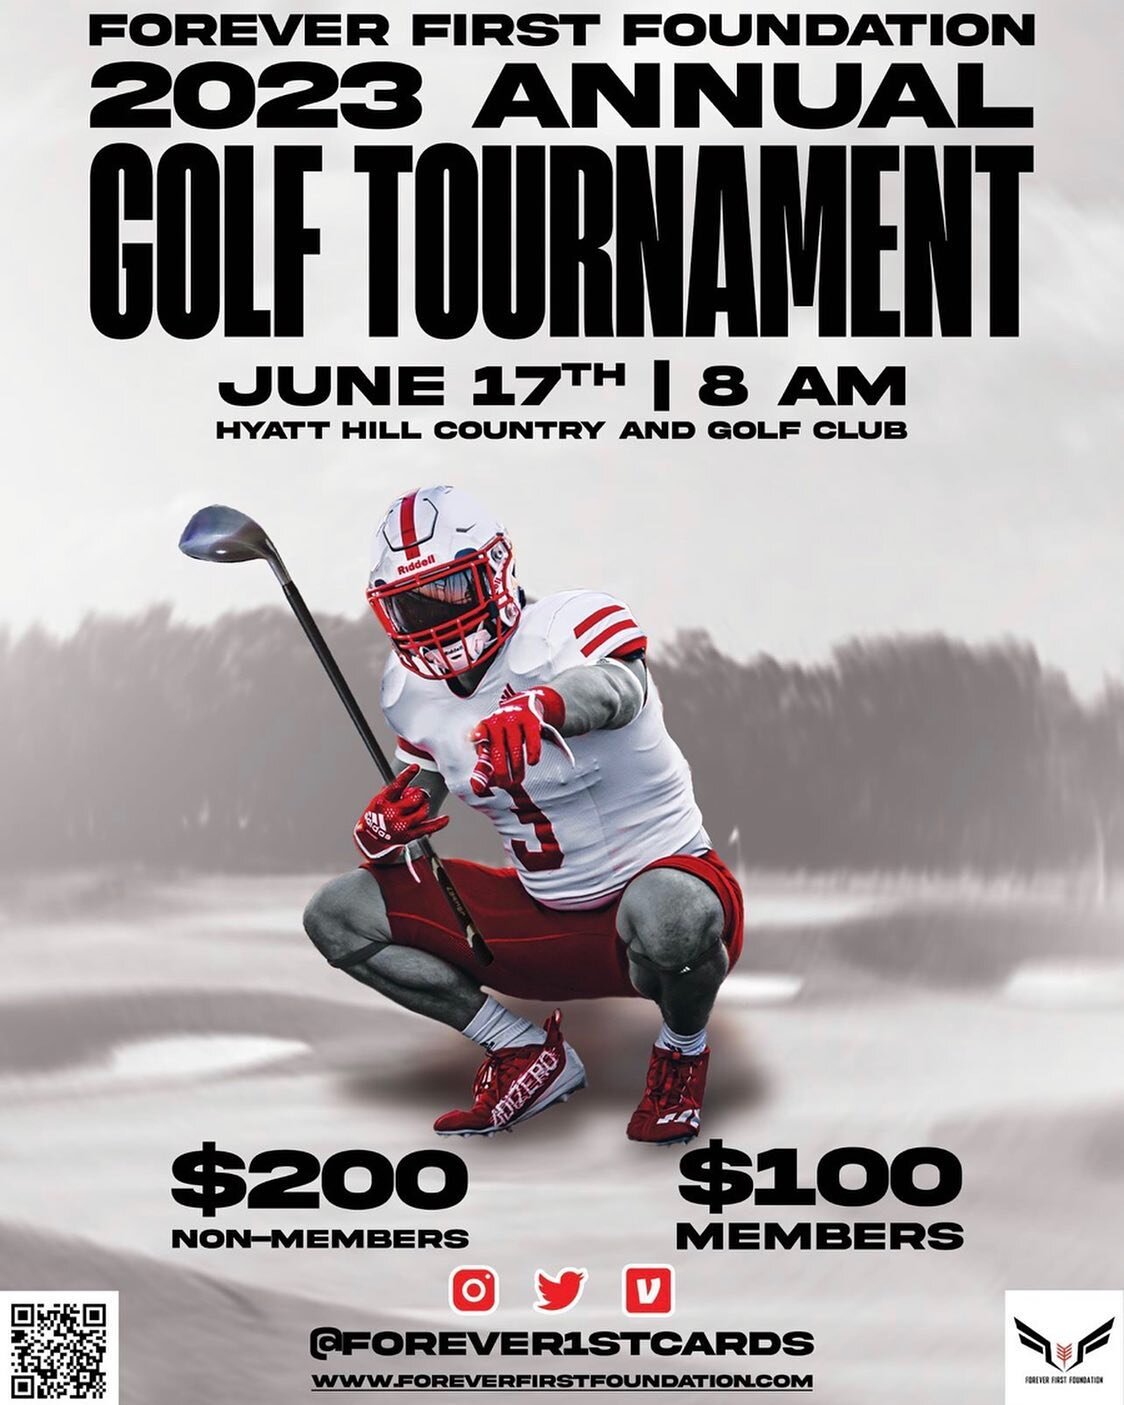 The 11th Annual Forever First Foundation Golf Tournament Fundraiser is quickly approaching. We&rsquo;re a little over 2 months out from the tournament date and spots are filling up fast. 

The tournament also includes a complimentary breakfast taco &